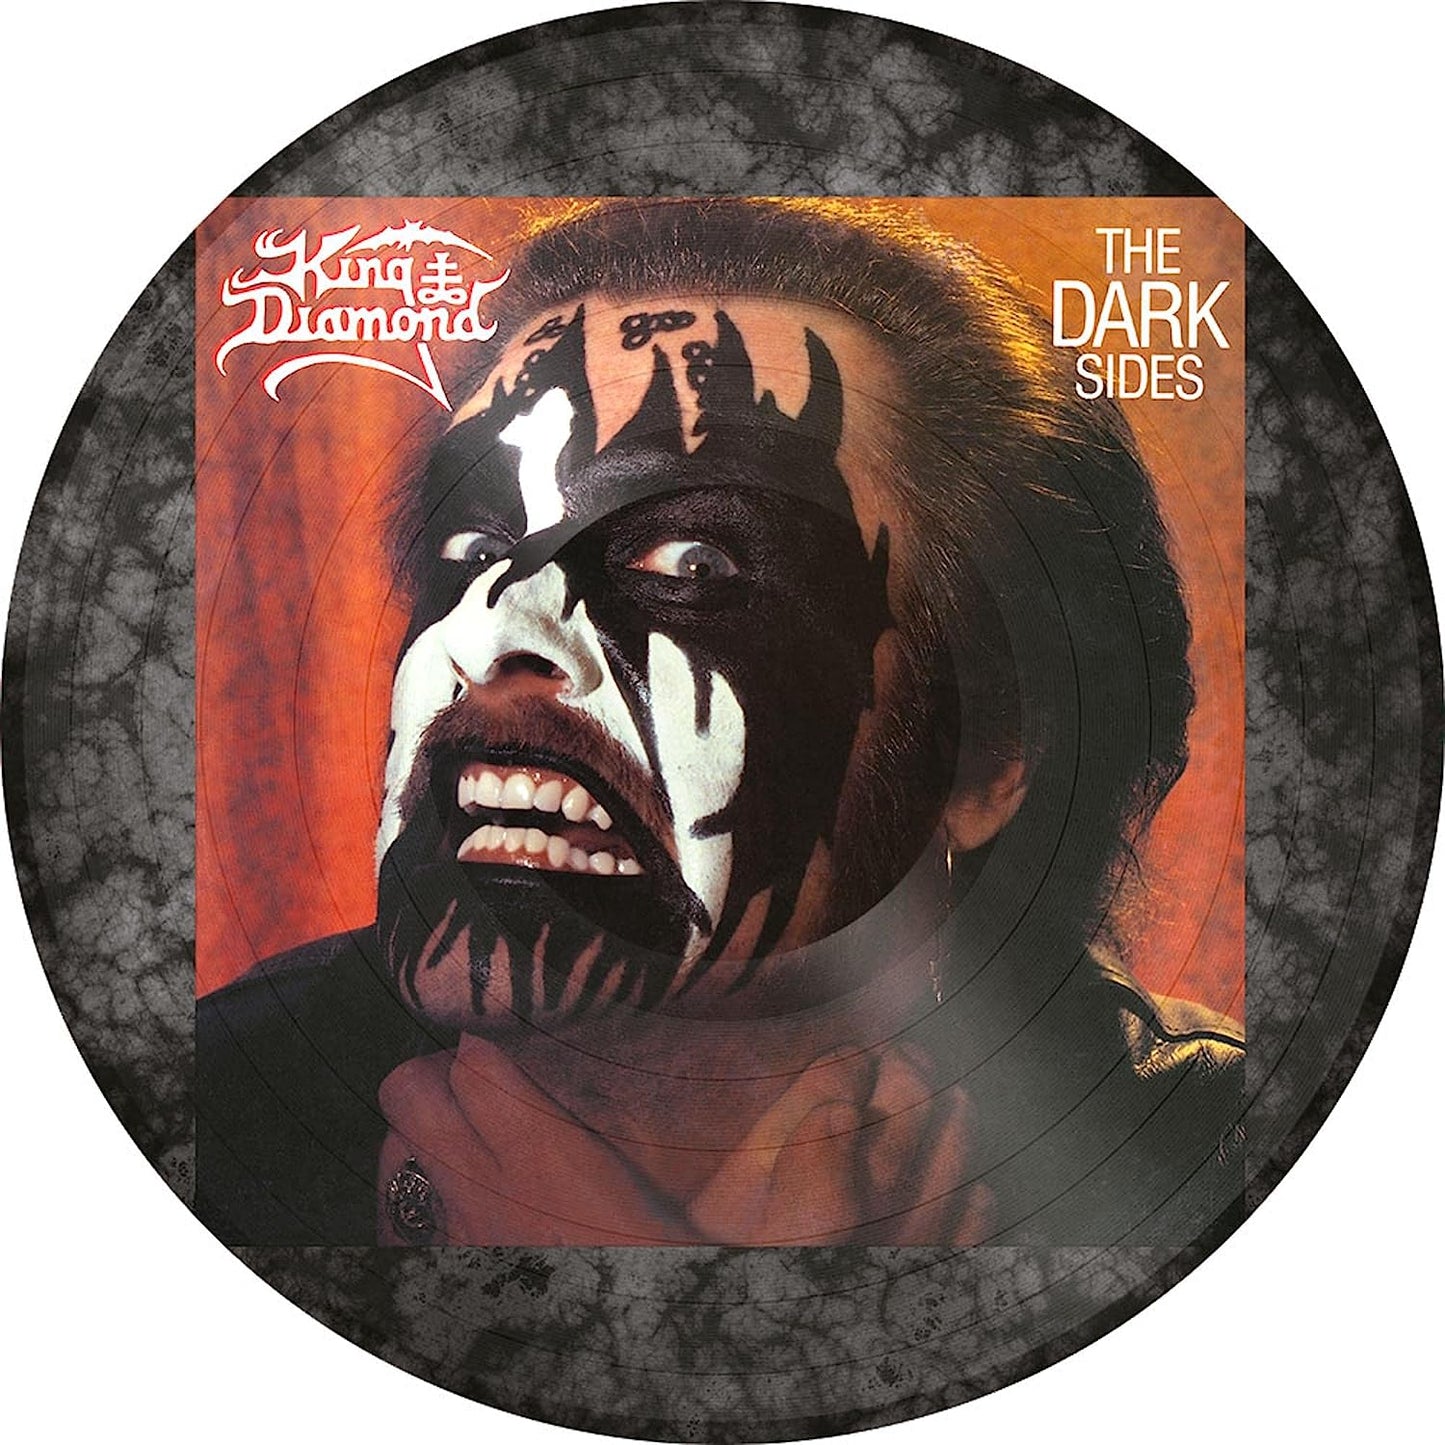 KING DIAMOND – The Dark Sides 12" (picture disc)